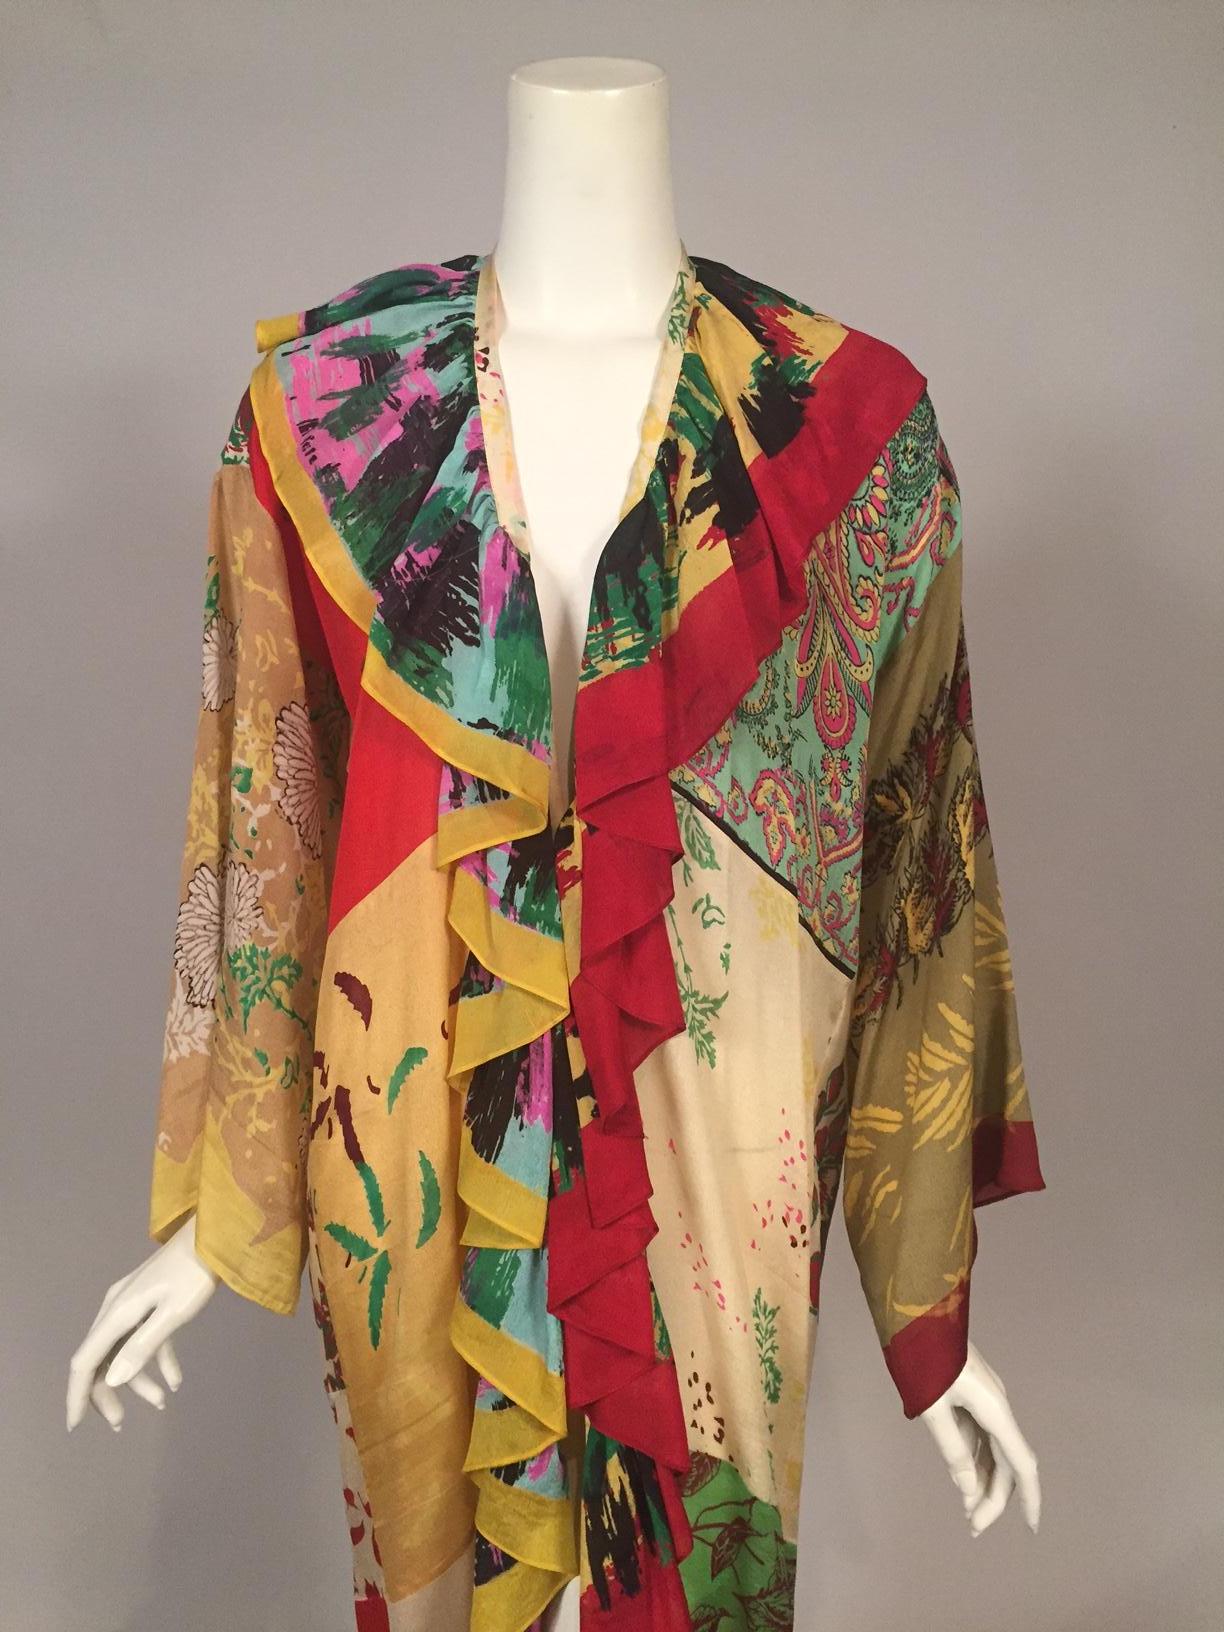 This charming and colorful dress was made from an assortment of printed silk scarves and retailed by Henri Bendel circa 1970. It is an adaptation of then current street style for a rich Hippie look. The scarves are pieced together beautifully. The